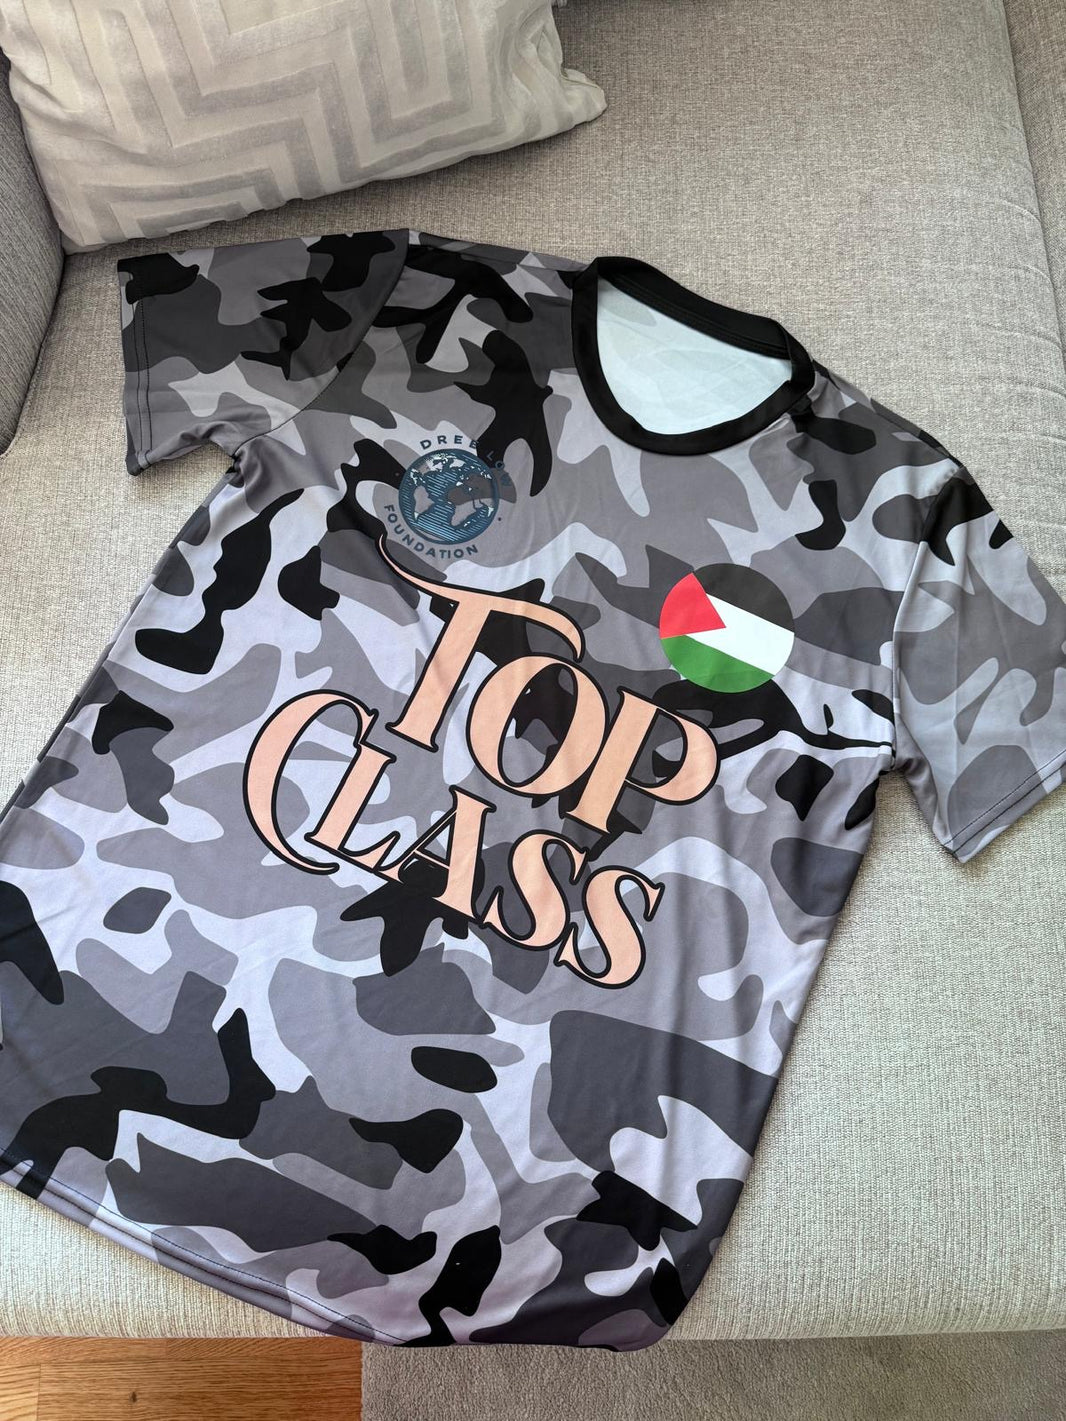 Top Class Clothing